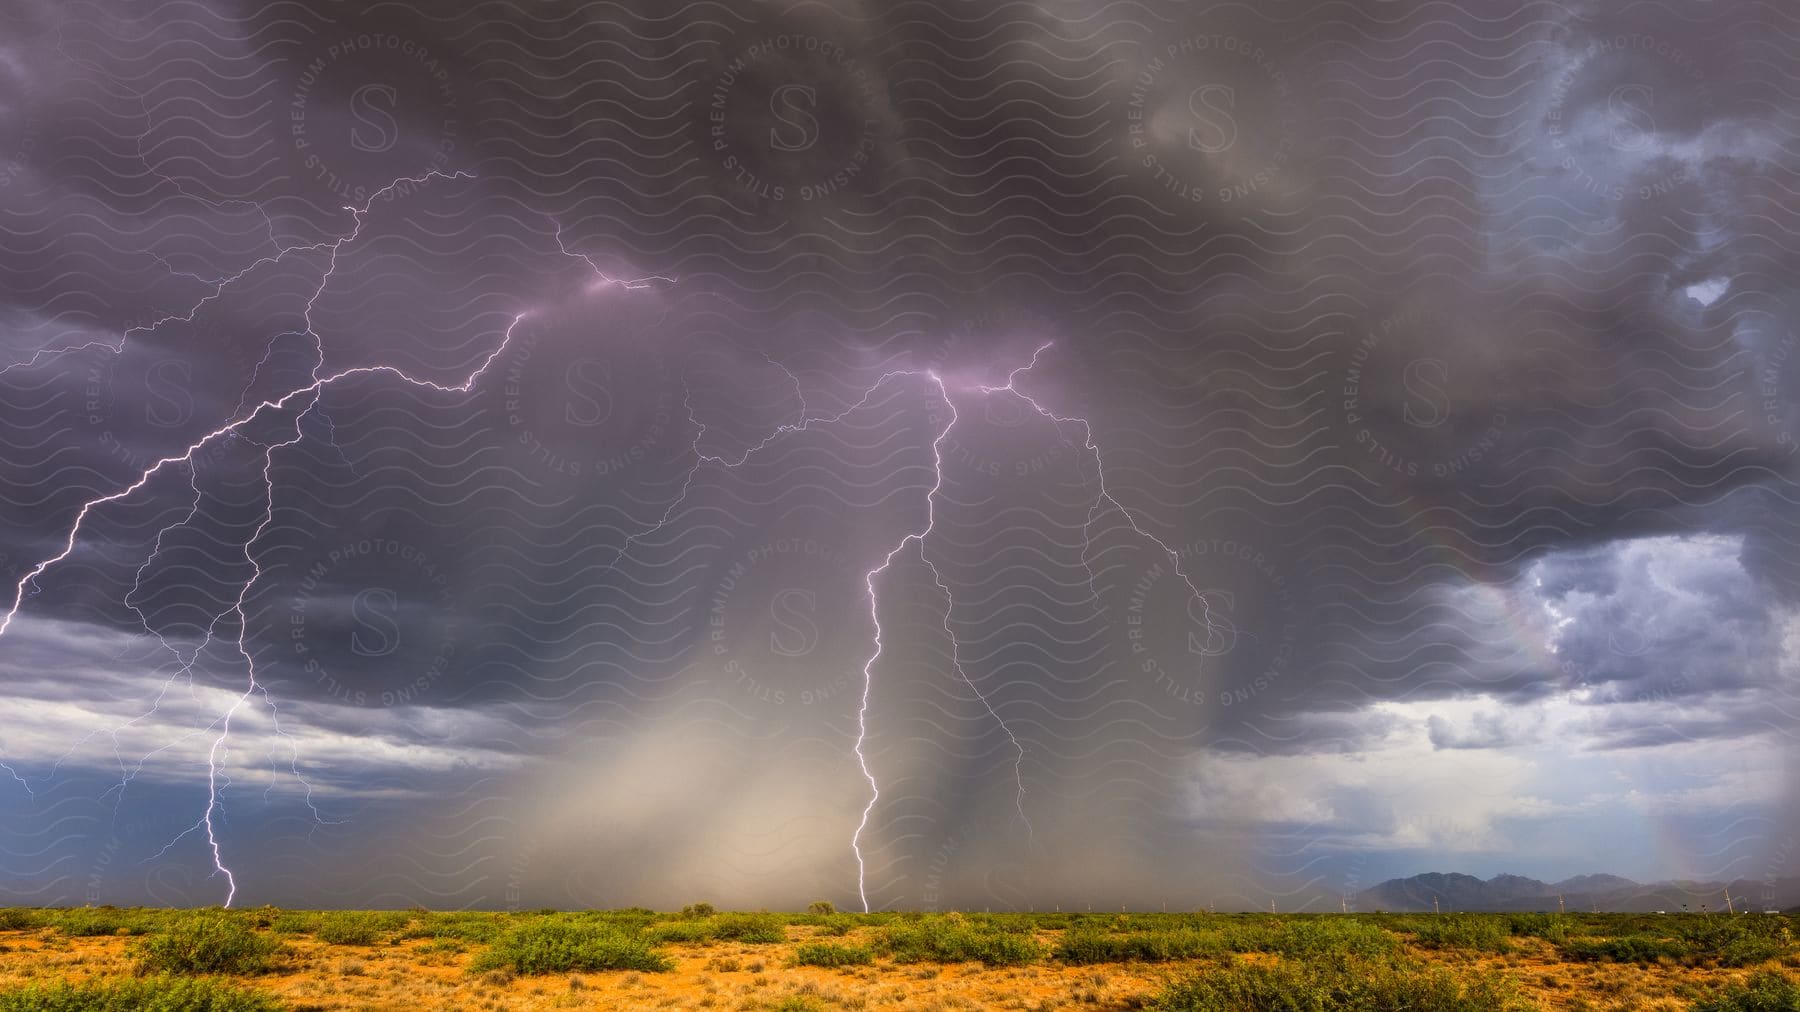 A dark cloud with lightning strikes over a sandy land with patches of green grass